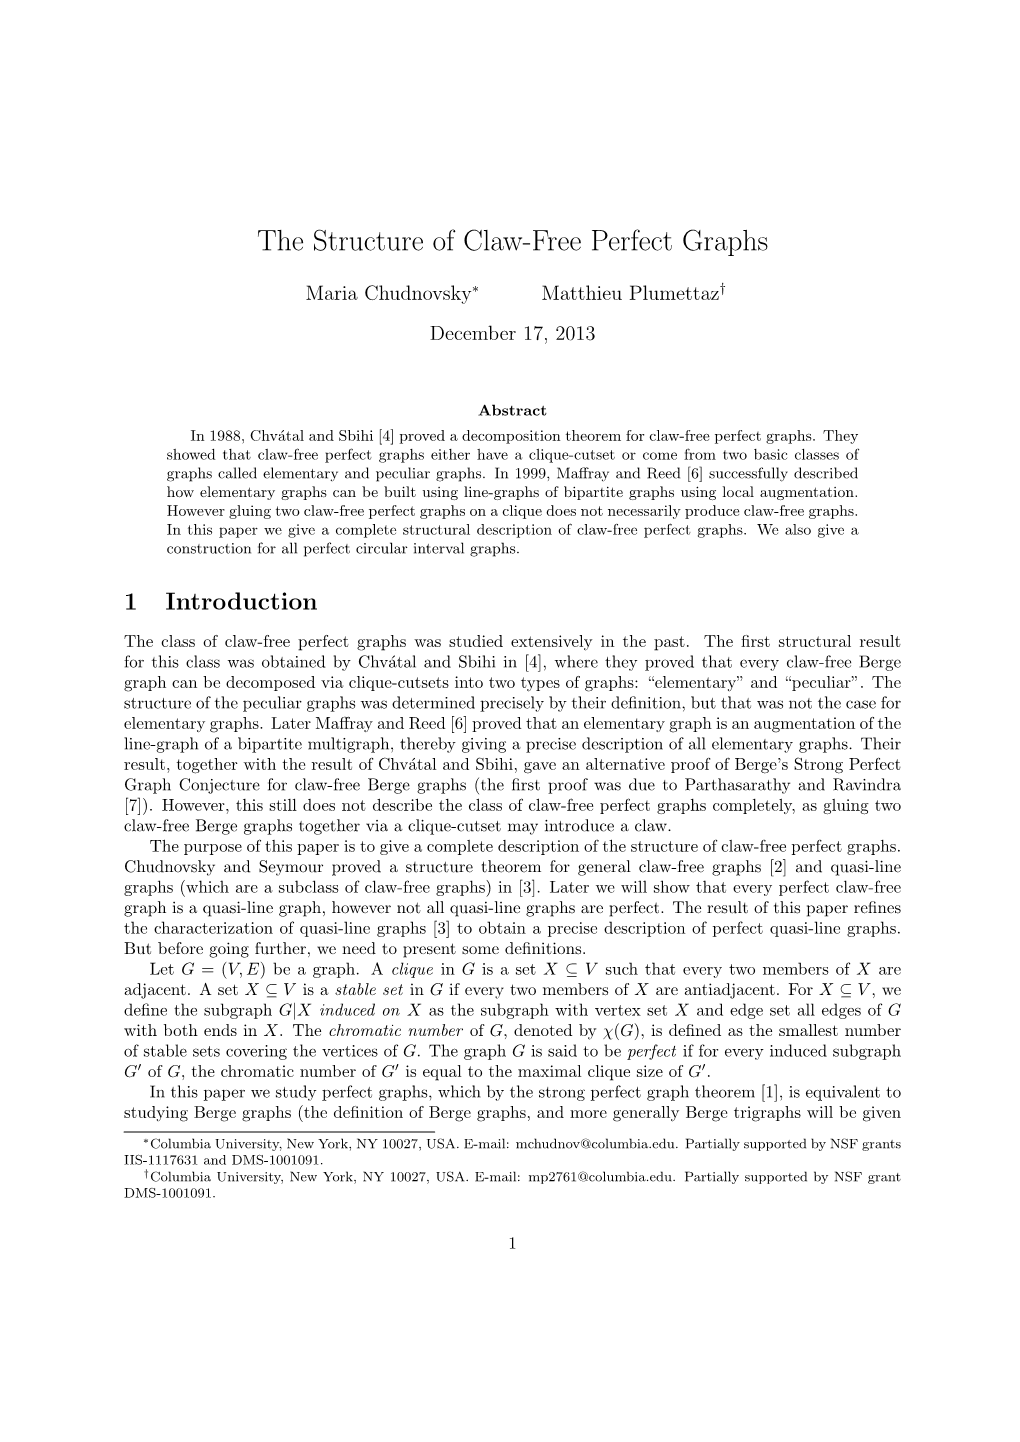 The Structure of Claw-Free Perfect Graphs